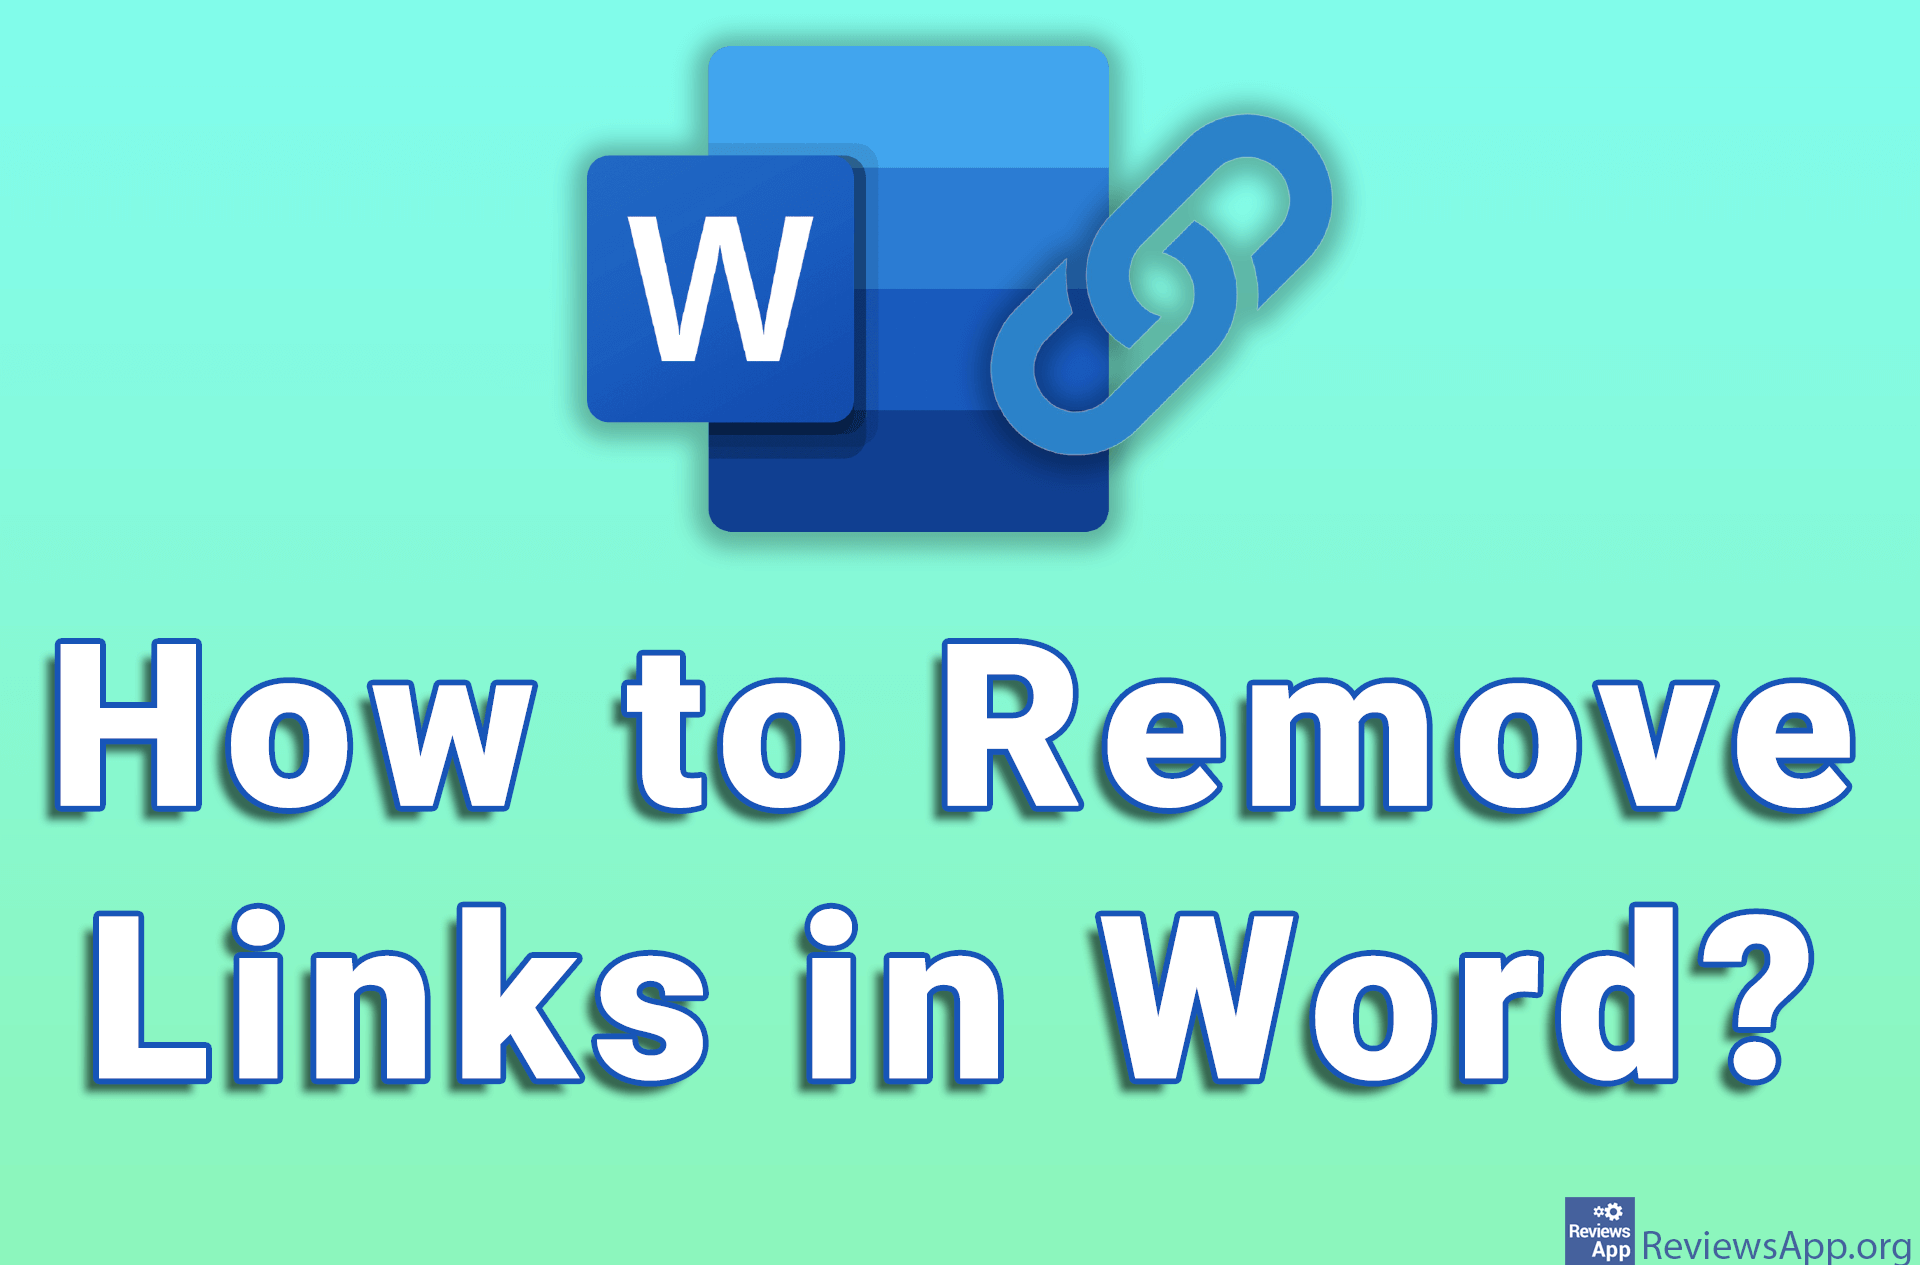 How to remove links in Word